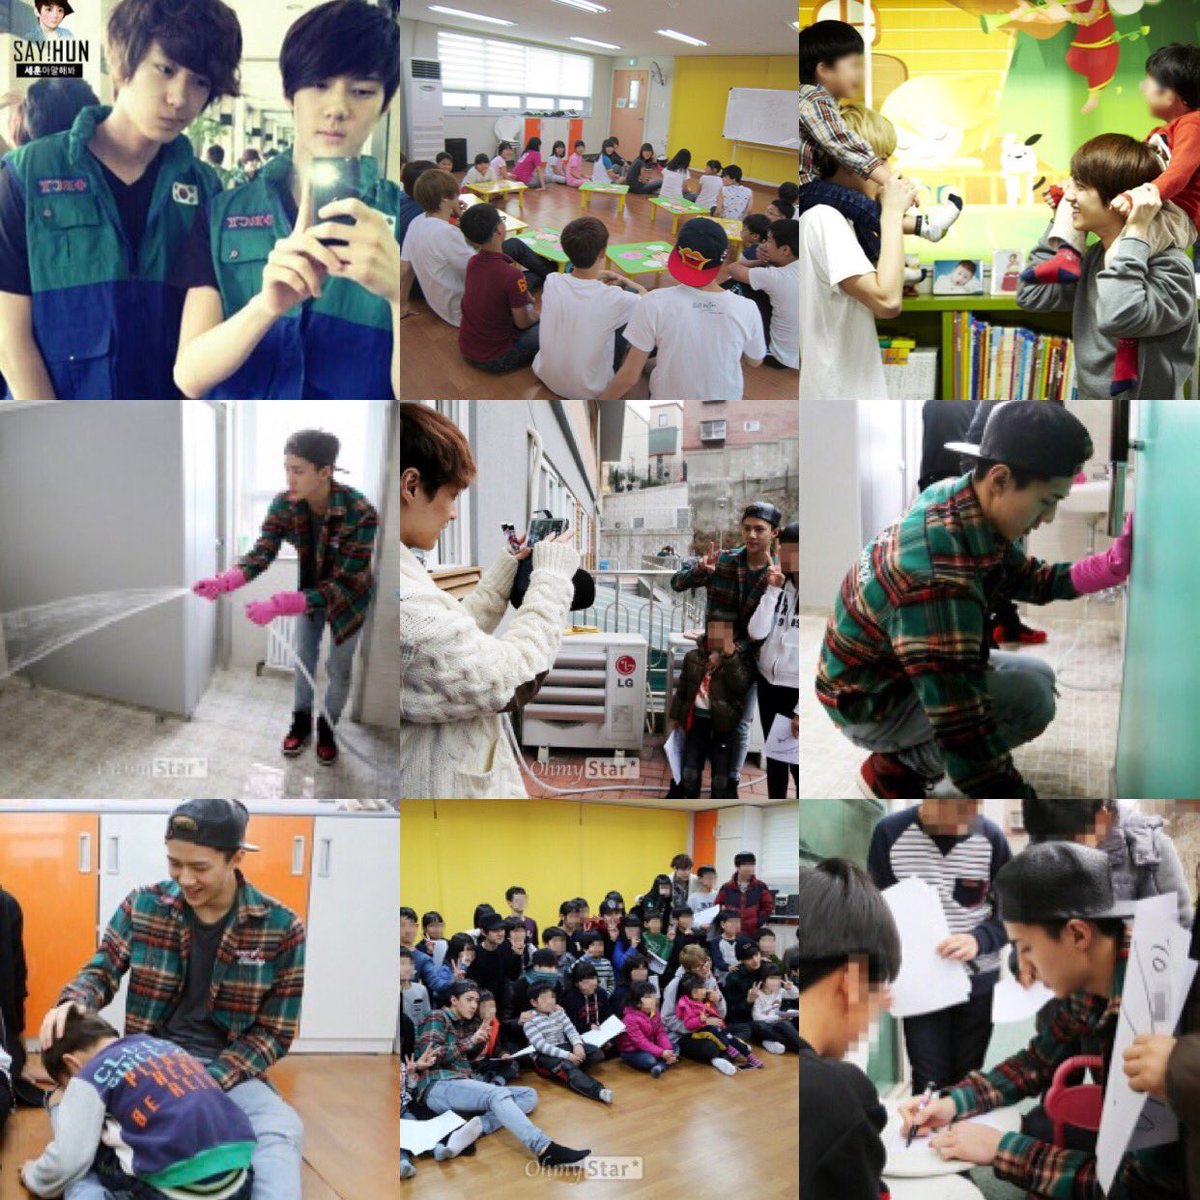 Sehun participated in the Korean RCY (Red Cross youth) before debut. RCY focuses on volunteerism, basic health awareness, social inclusion, global interaction, and education including education about the movement for kids and people between the age of 8 and early twenties.